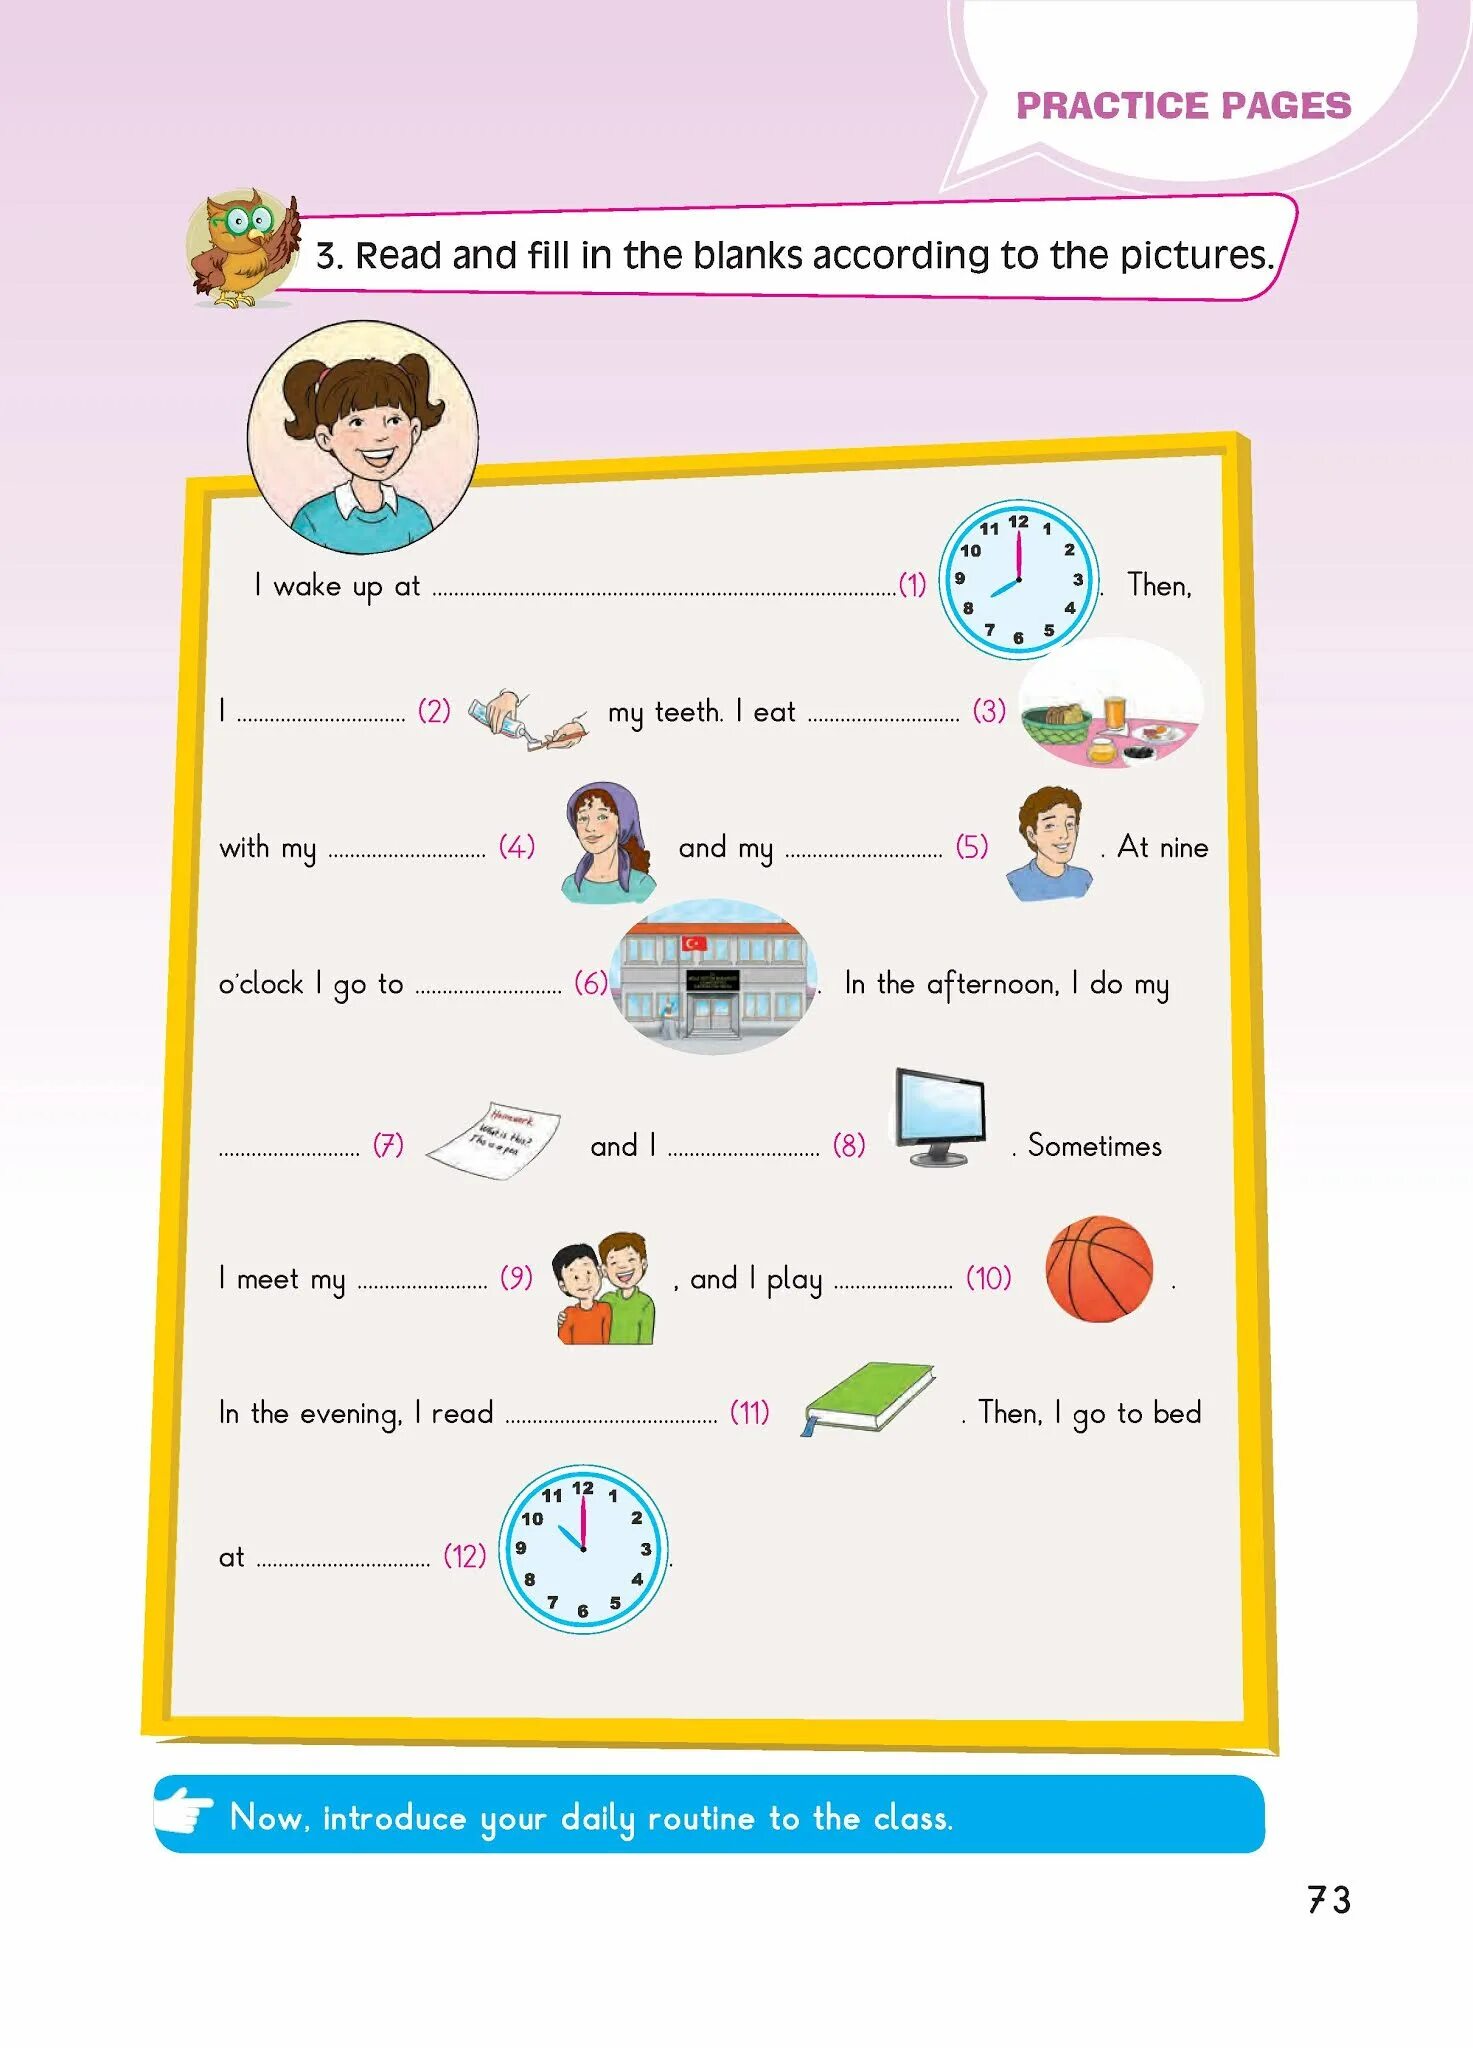 Present simple routine. Daily Routine для детей. Daily Routine Worksheets for Kids. Упражнения Daily Routine present simple. Daily Routine story for Kids.